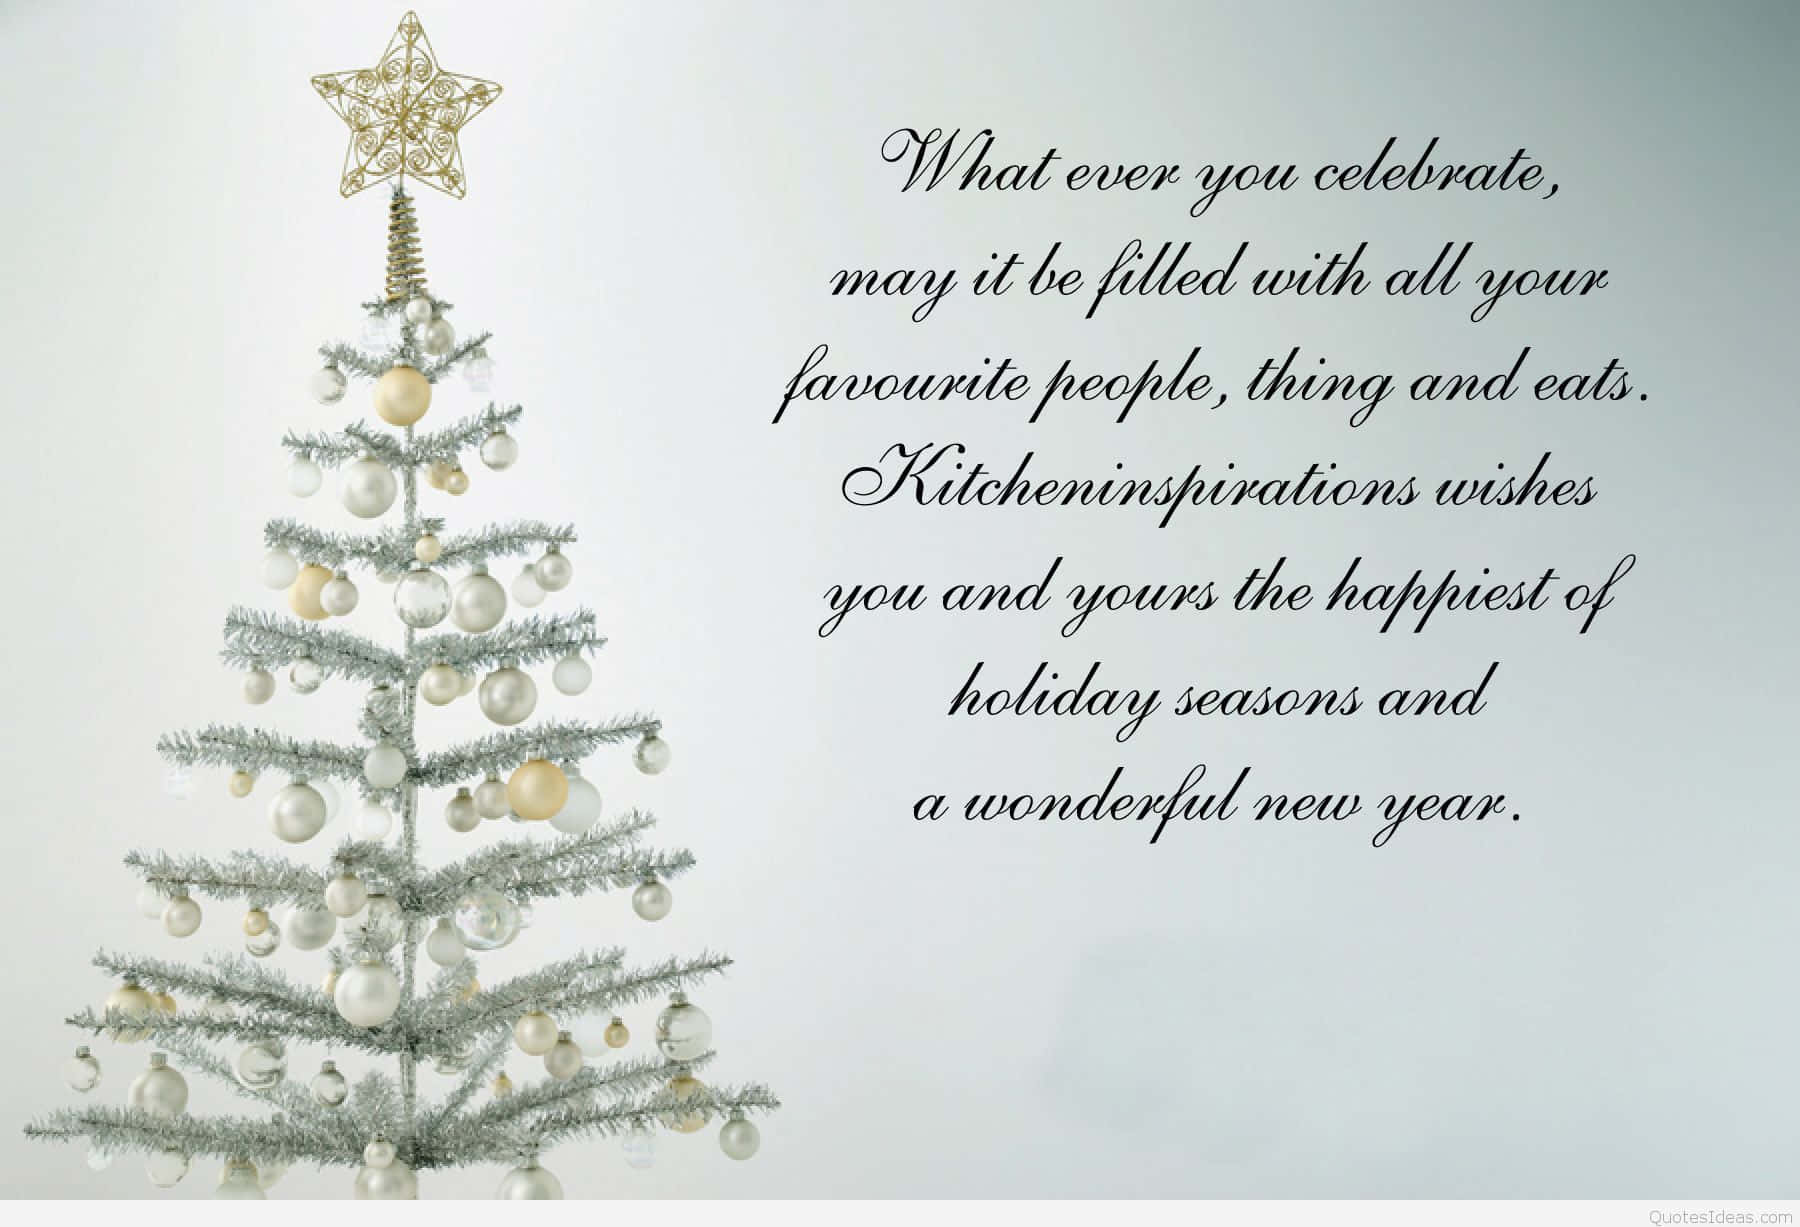 Spread the Christmas joy and make this season one to remember. Wallpaper